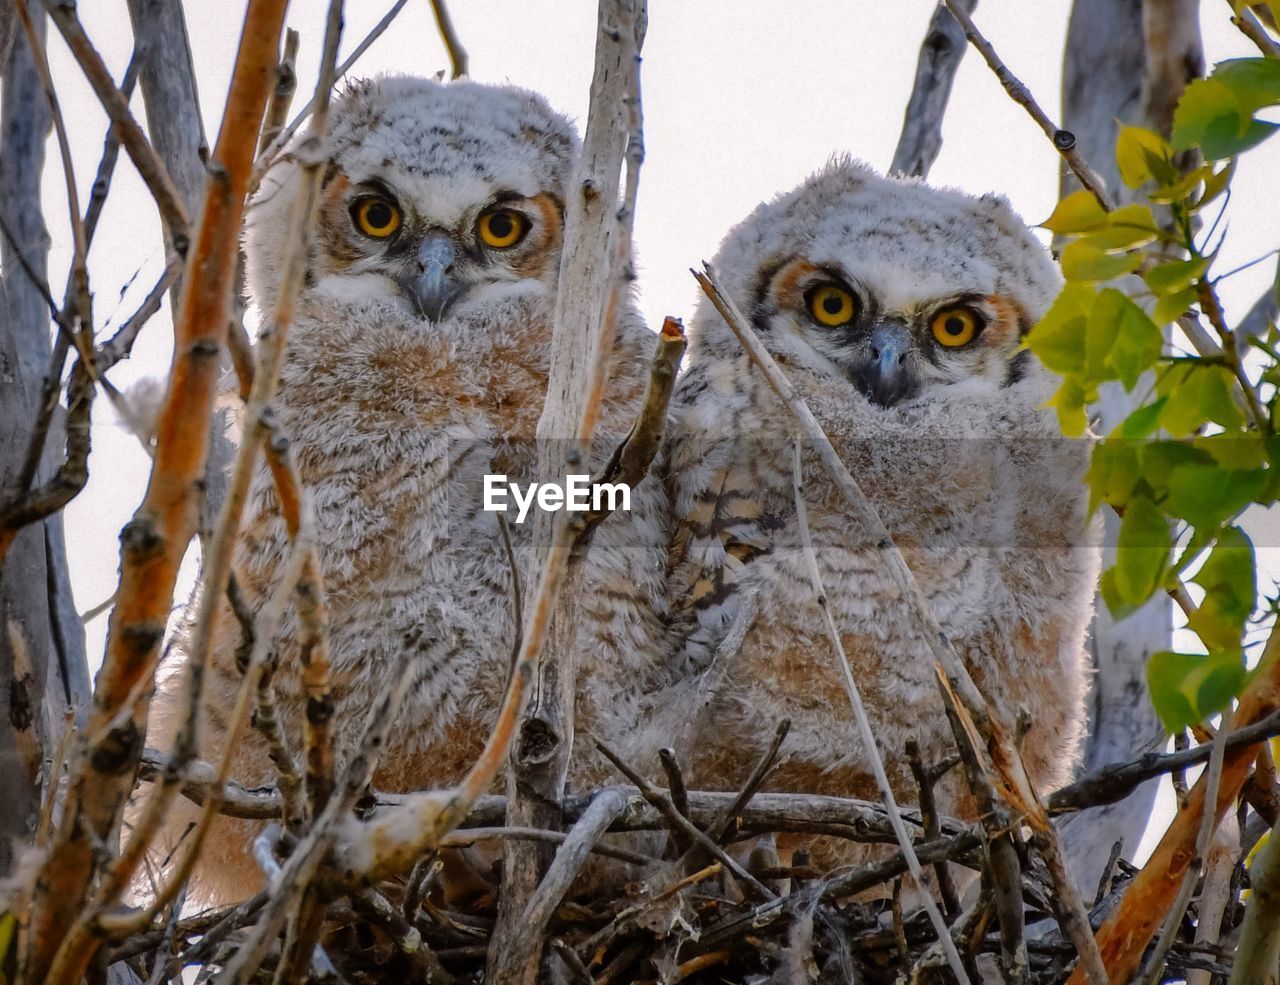 Close-up portrait of two great horned owlets 